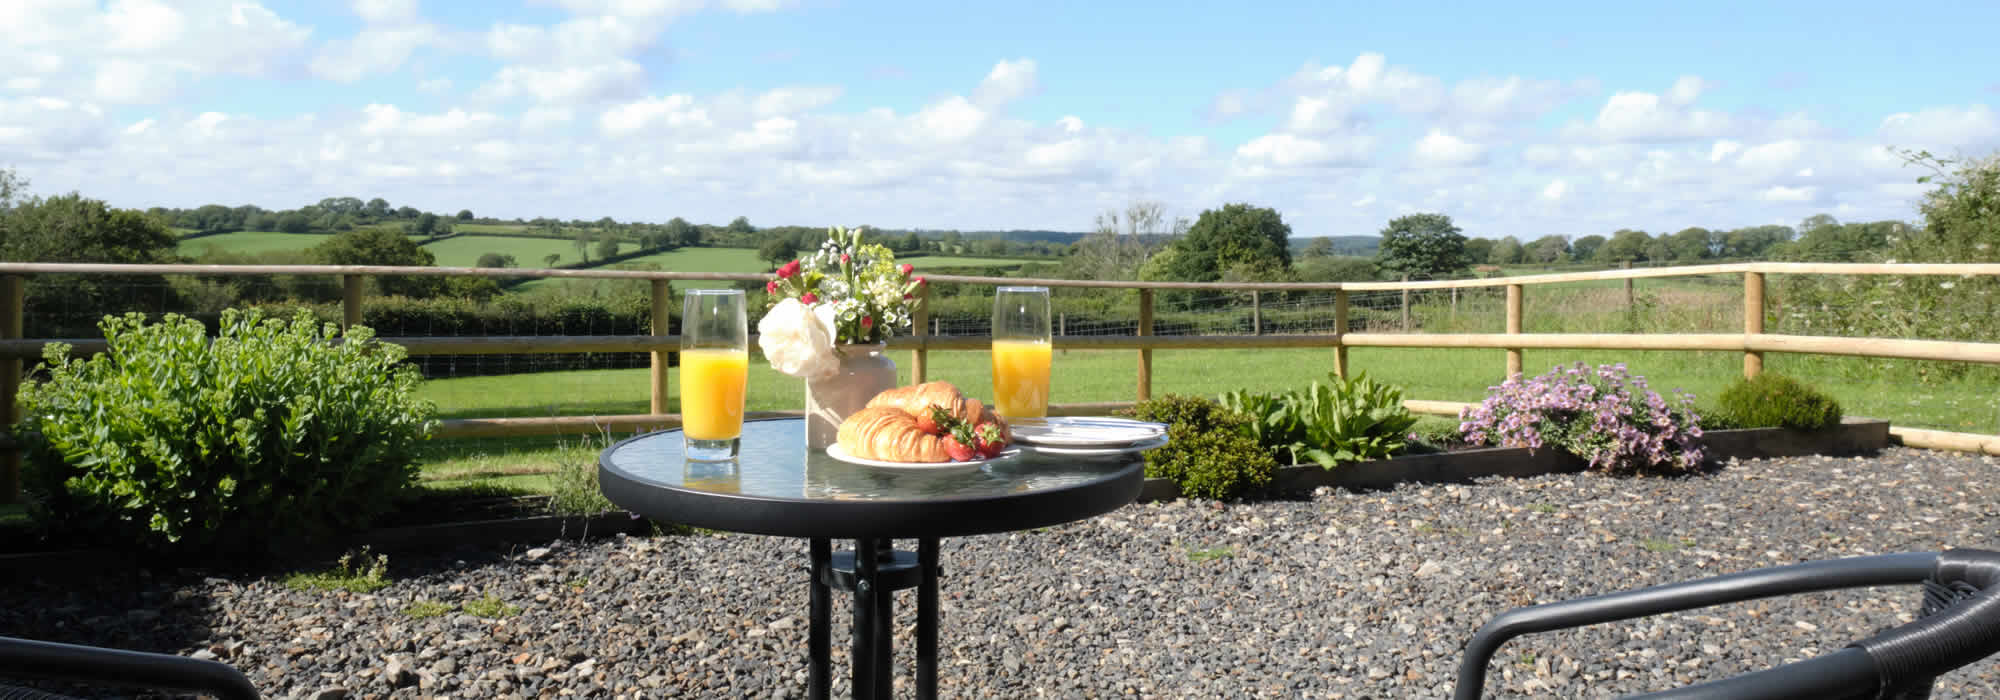 Selfcatering Dartmoor holiday cottages